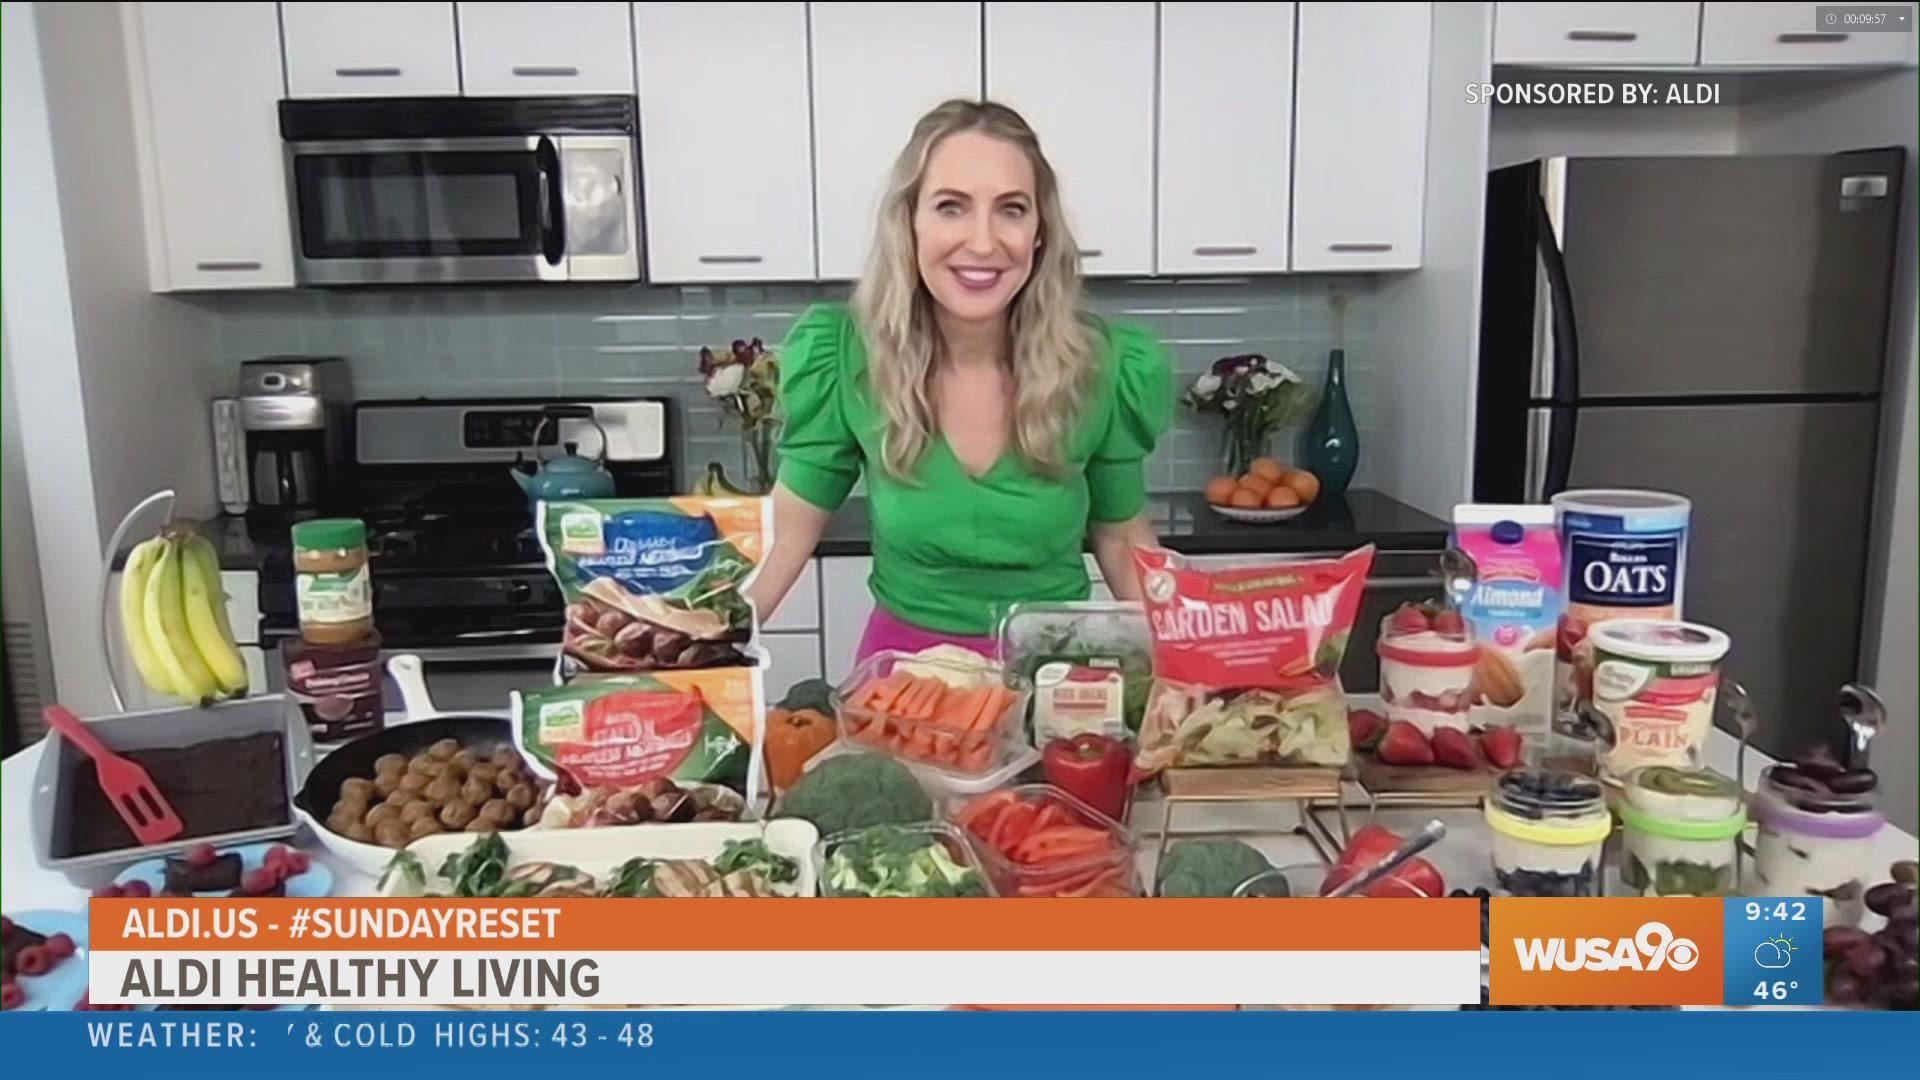 Sponsored by ALDI. Registered Dietitian & Nutritionist DJ Blatner shares healthy, delicious, and affordable ways to prep meals. Visit Aldi.us for more #SundayReset.